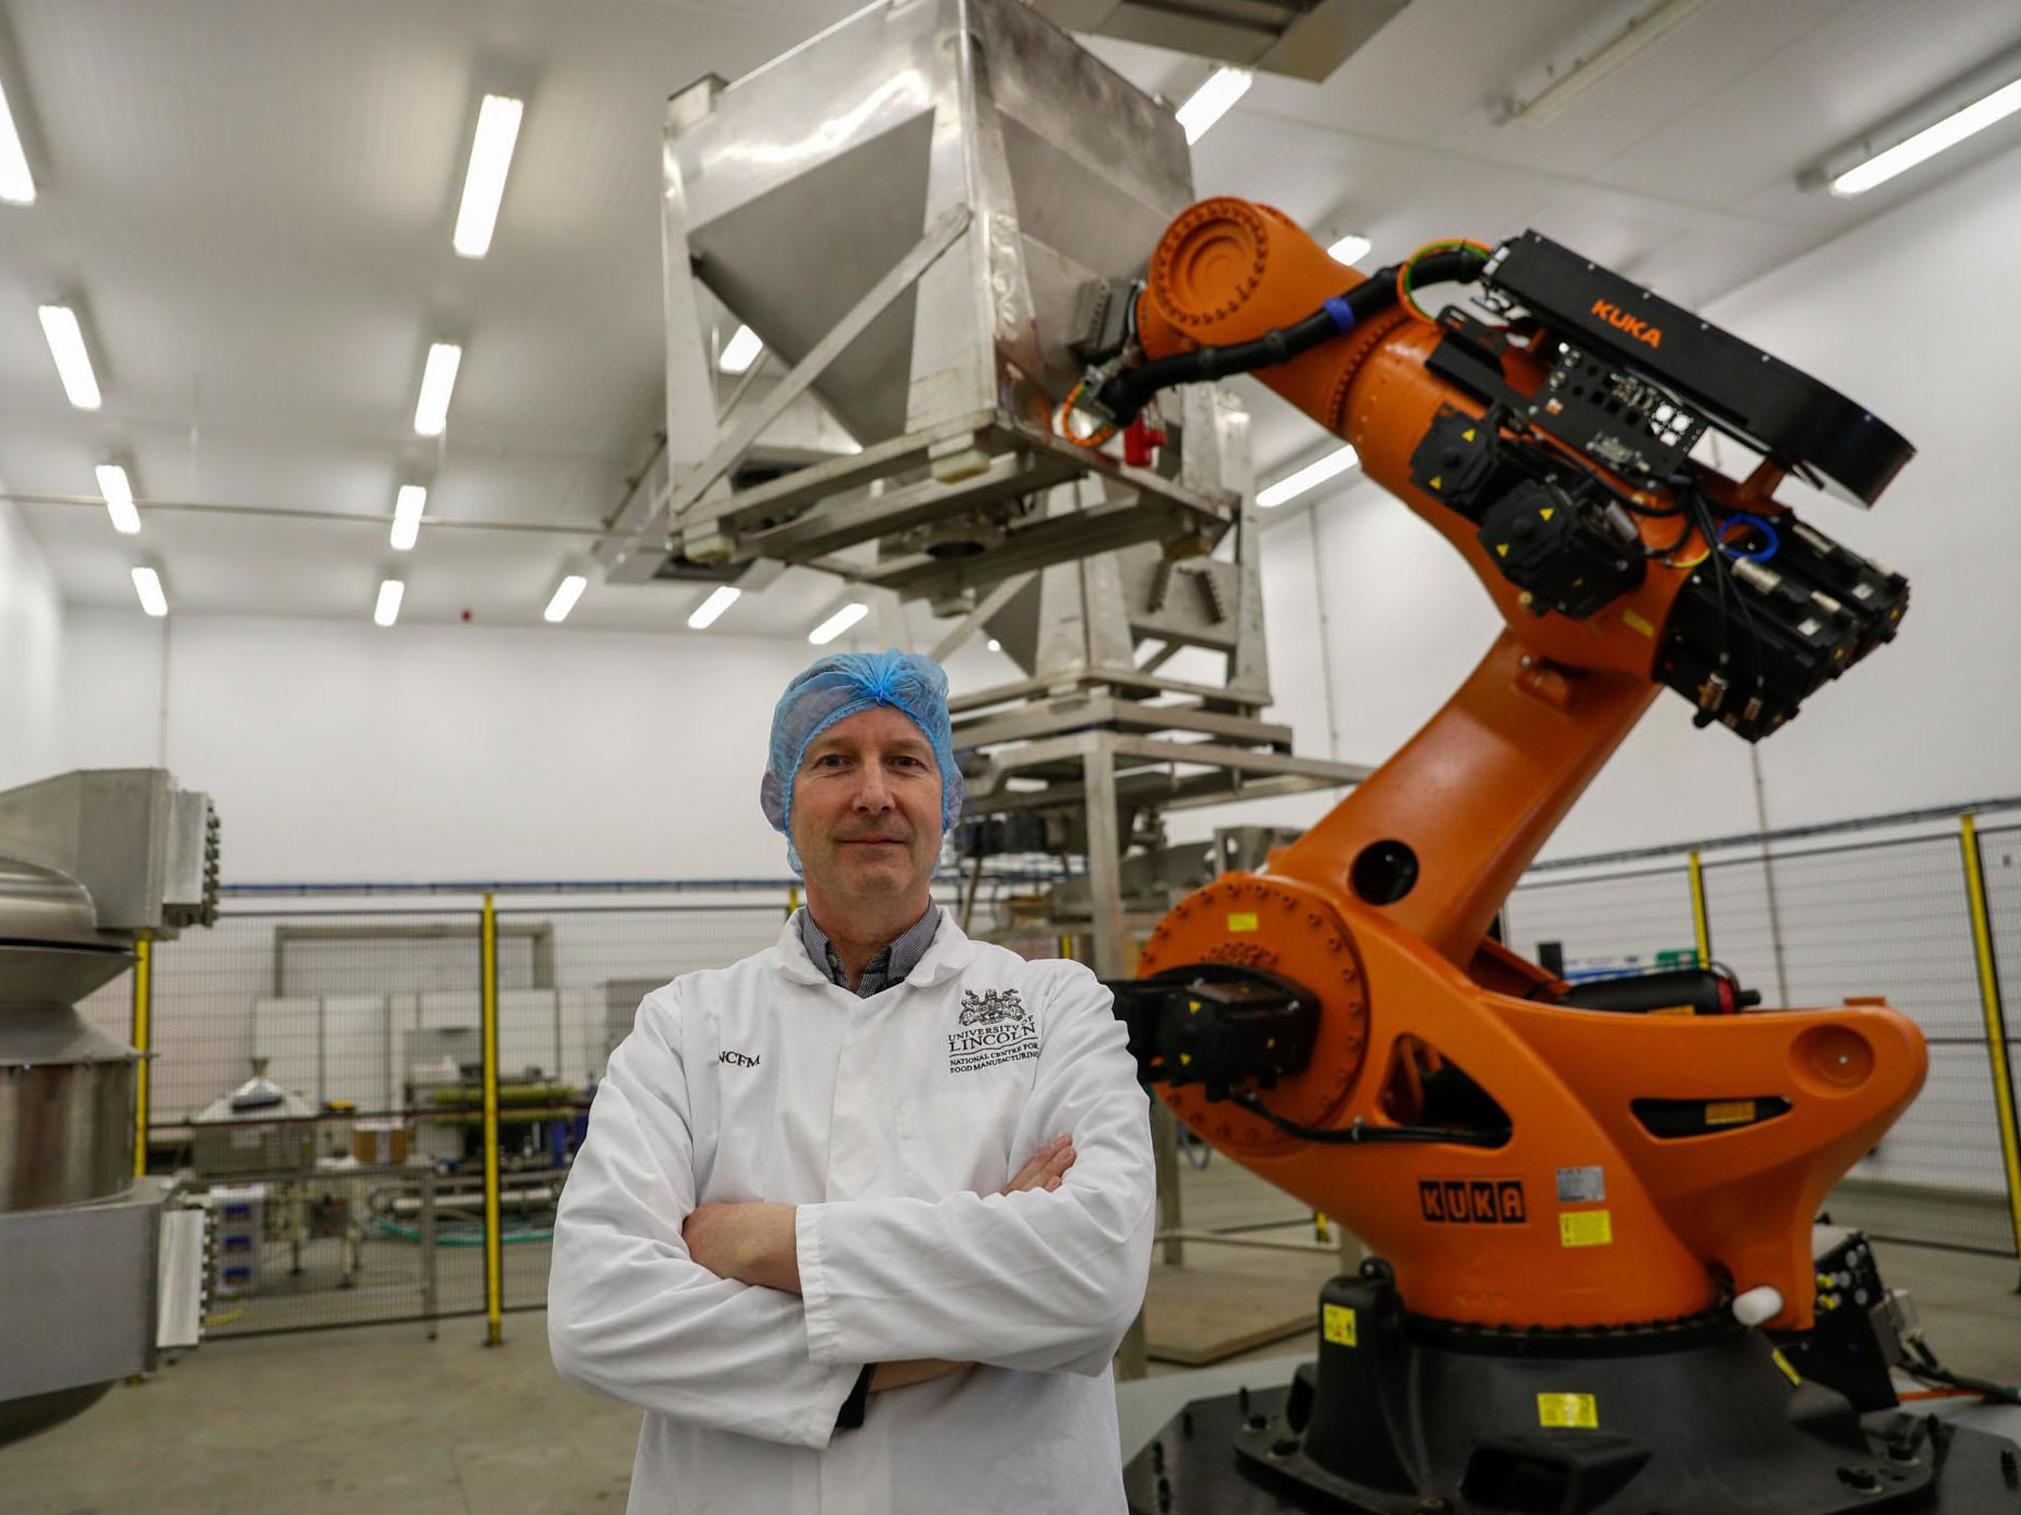 Product development chef Chris Brooks with a ‘robotic chef’ at the National Centre for Food Manufacturing in Holbeach, Lincolnshire